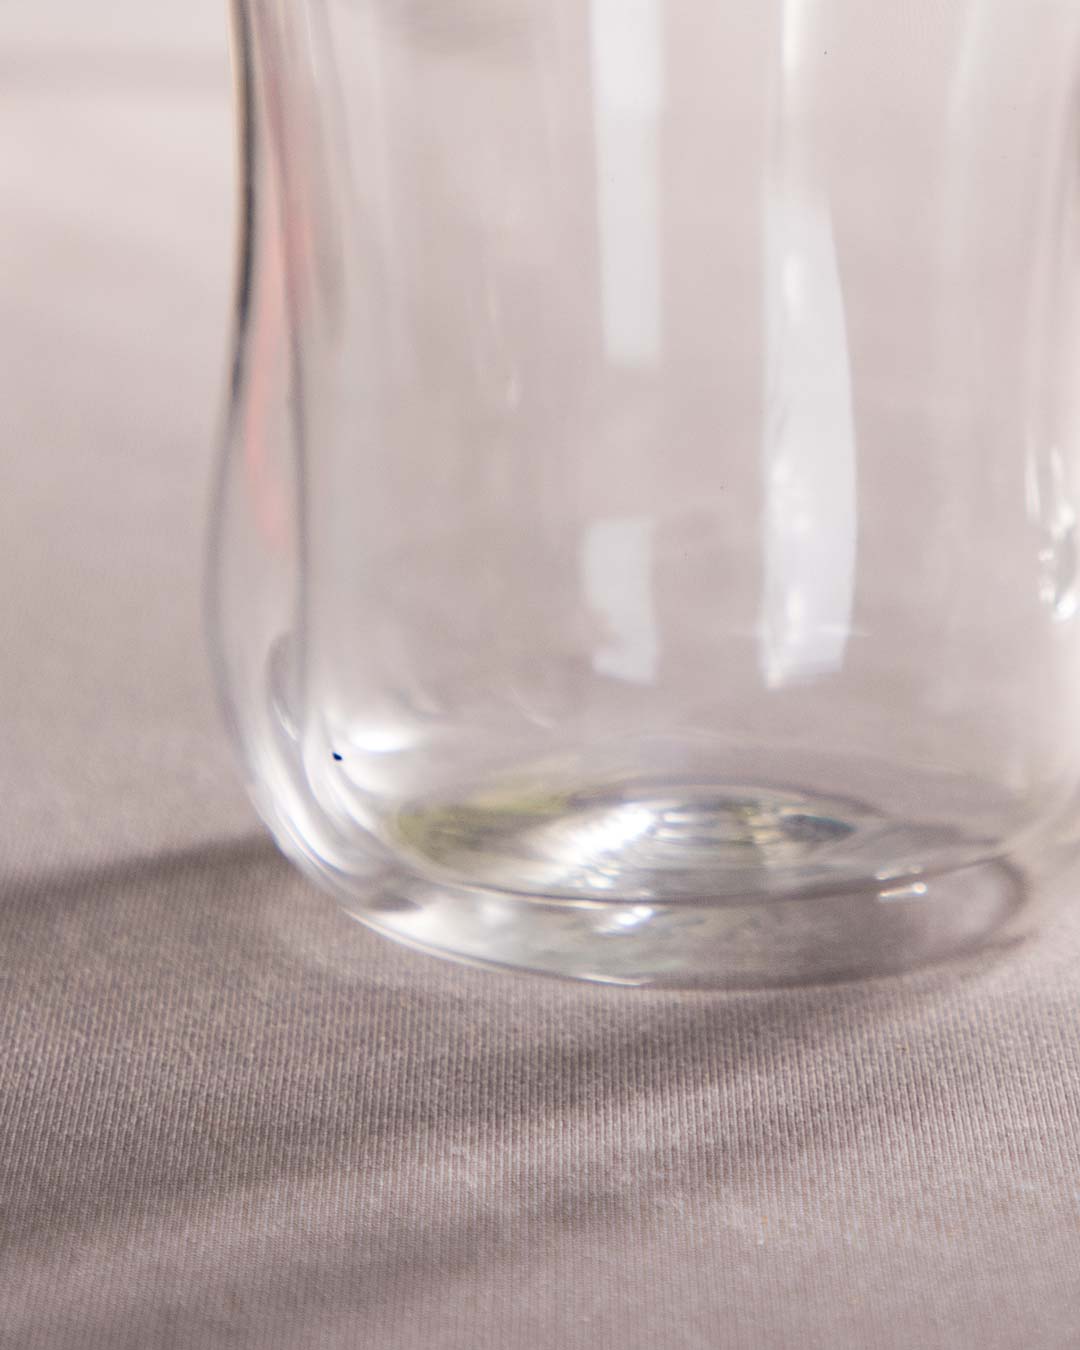 Close-up of the double-walled design of a transparent glass tea cup on a textured tablecloth.